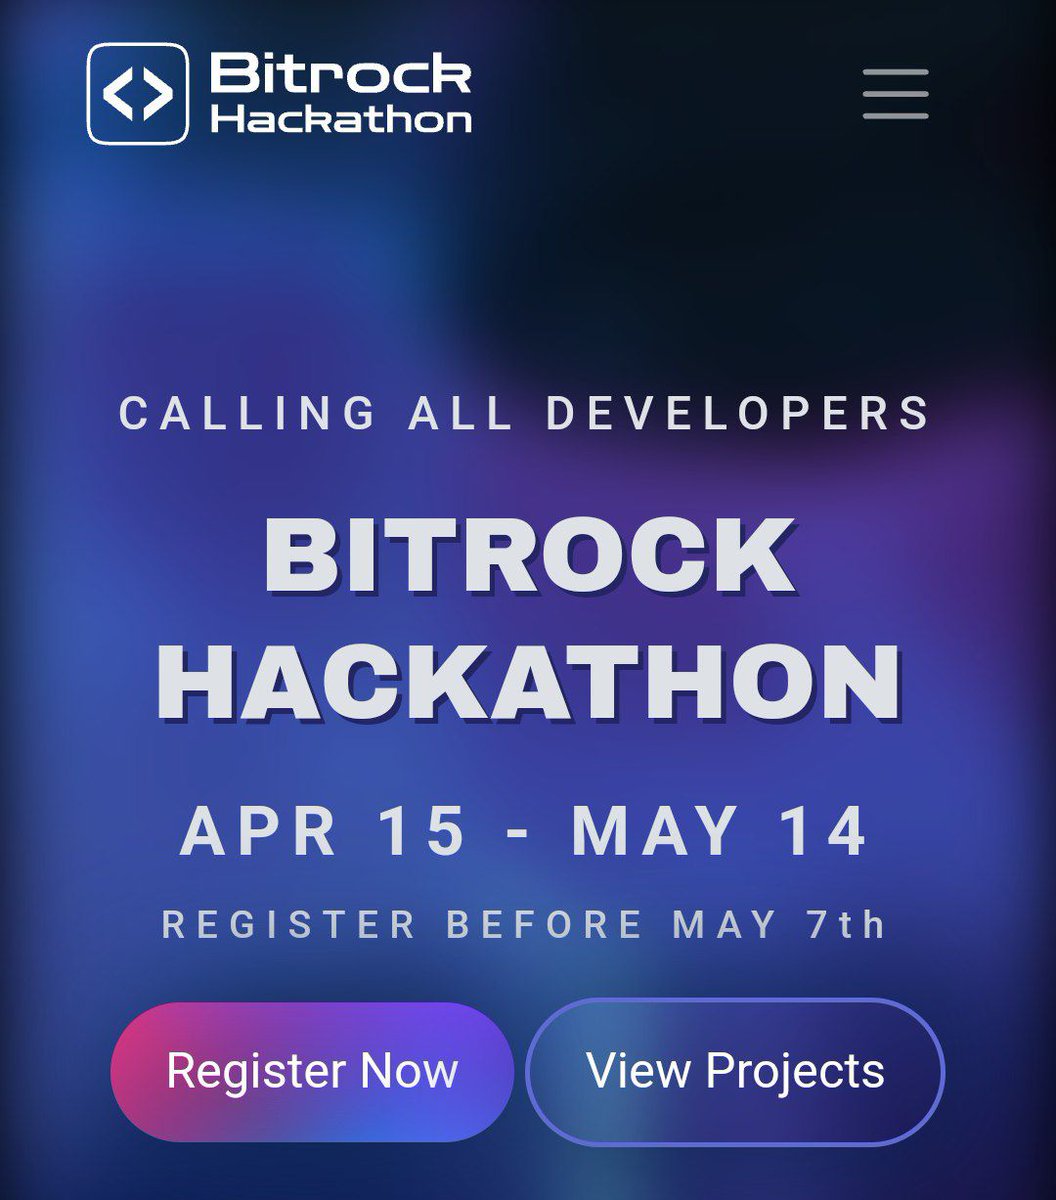 We are excited to share the first round of approved projects for the Bitrock hackathon! 💪🏻🔥

hackathon.bit-rock.io/projectlist/

There are many more projects currently being reviewed for approval, and the list will be updated as more projects are approved.

Hackathon registration is still